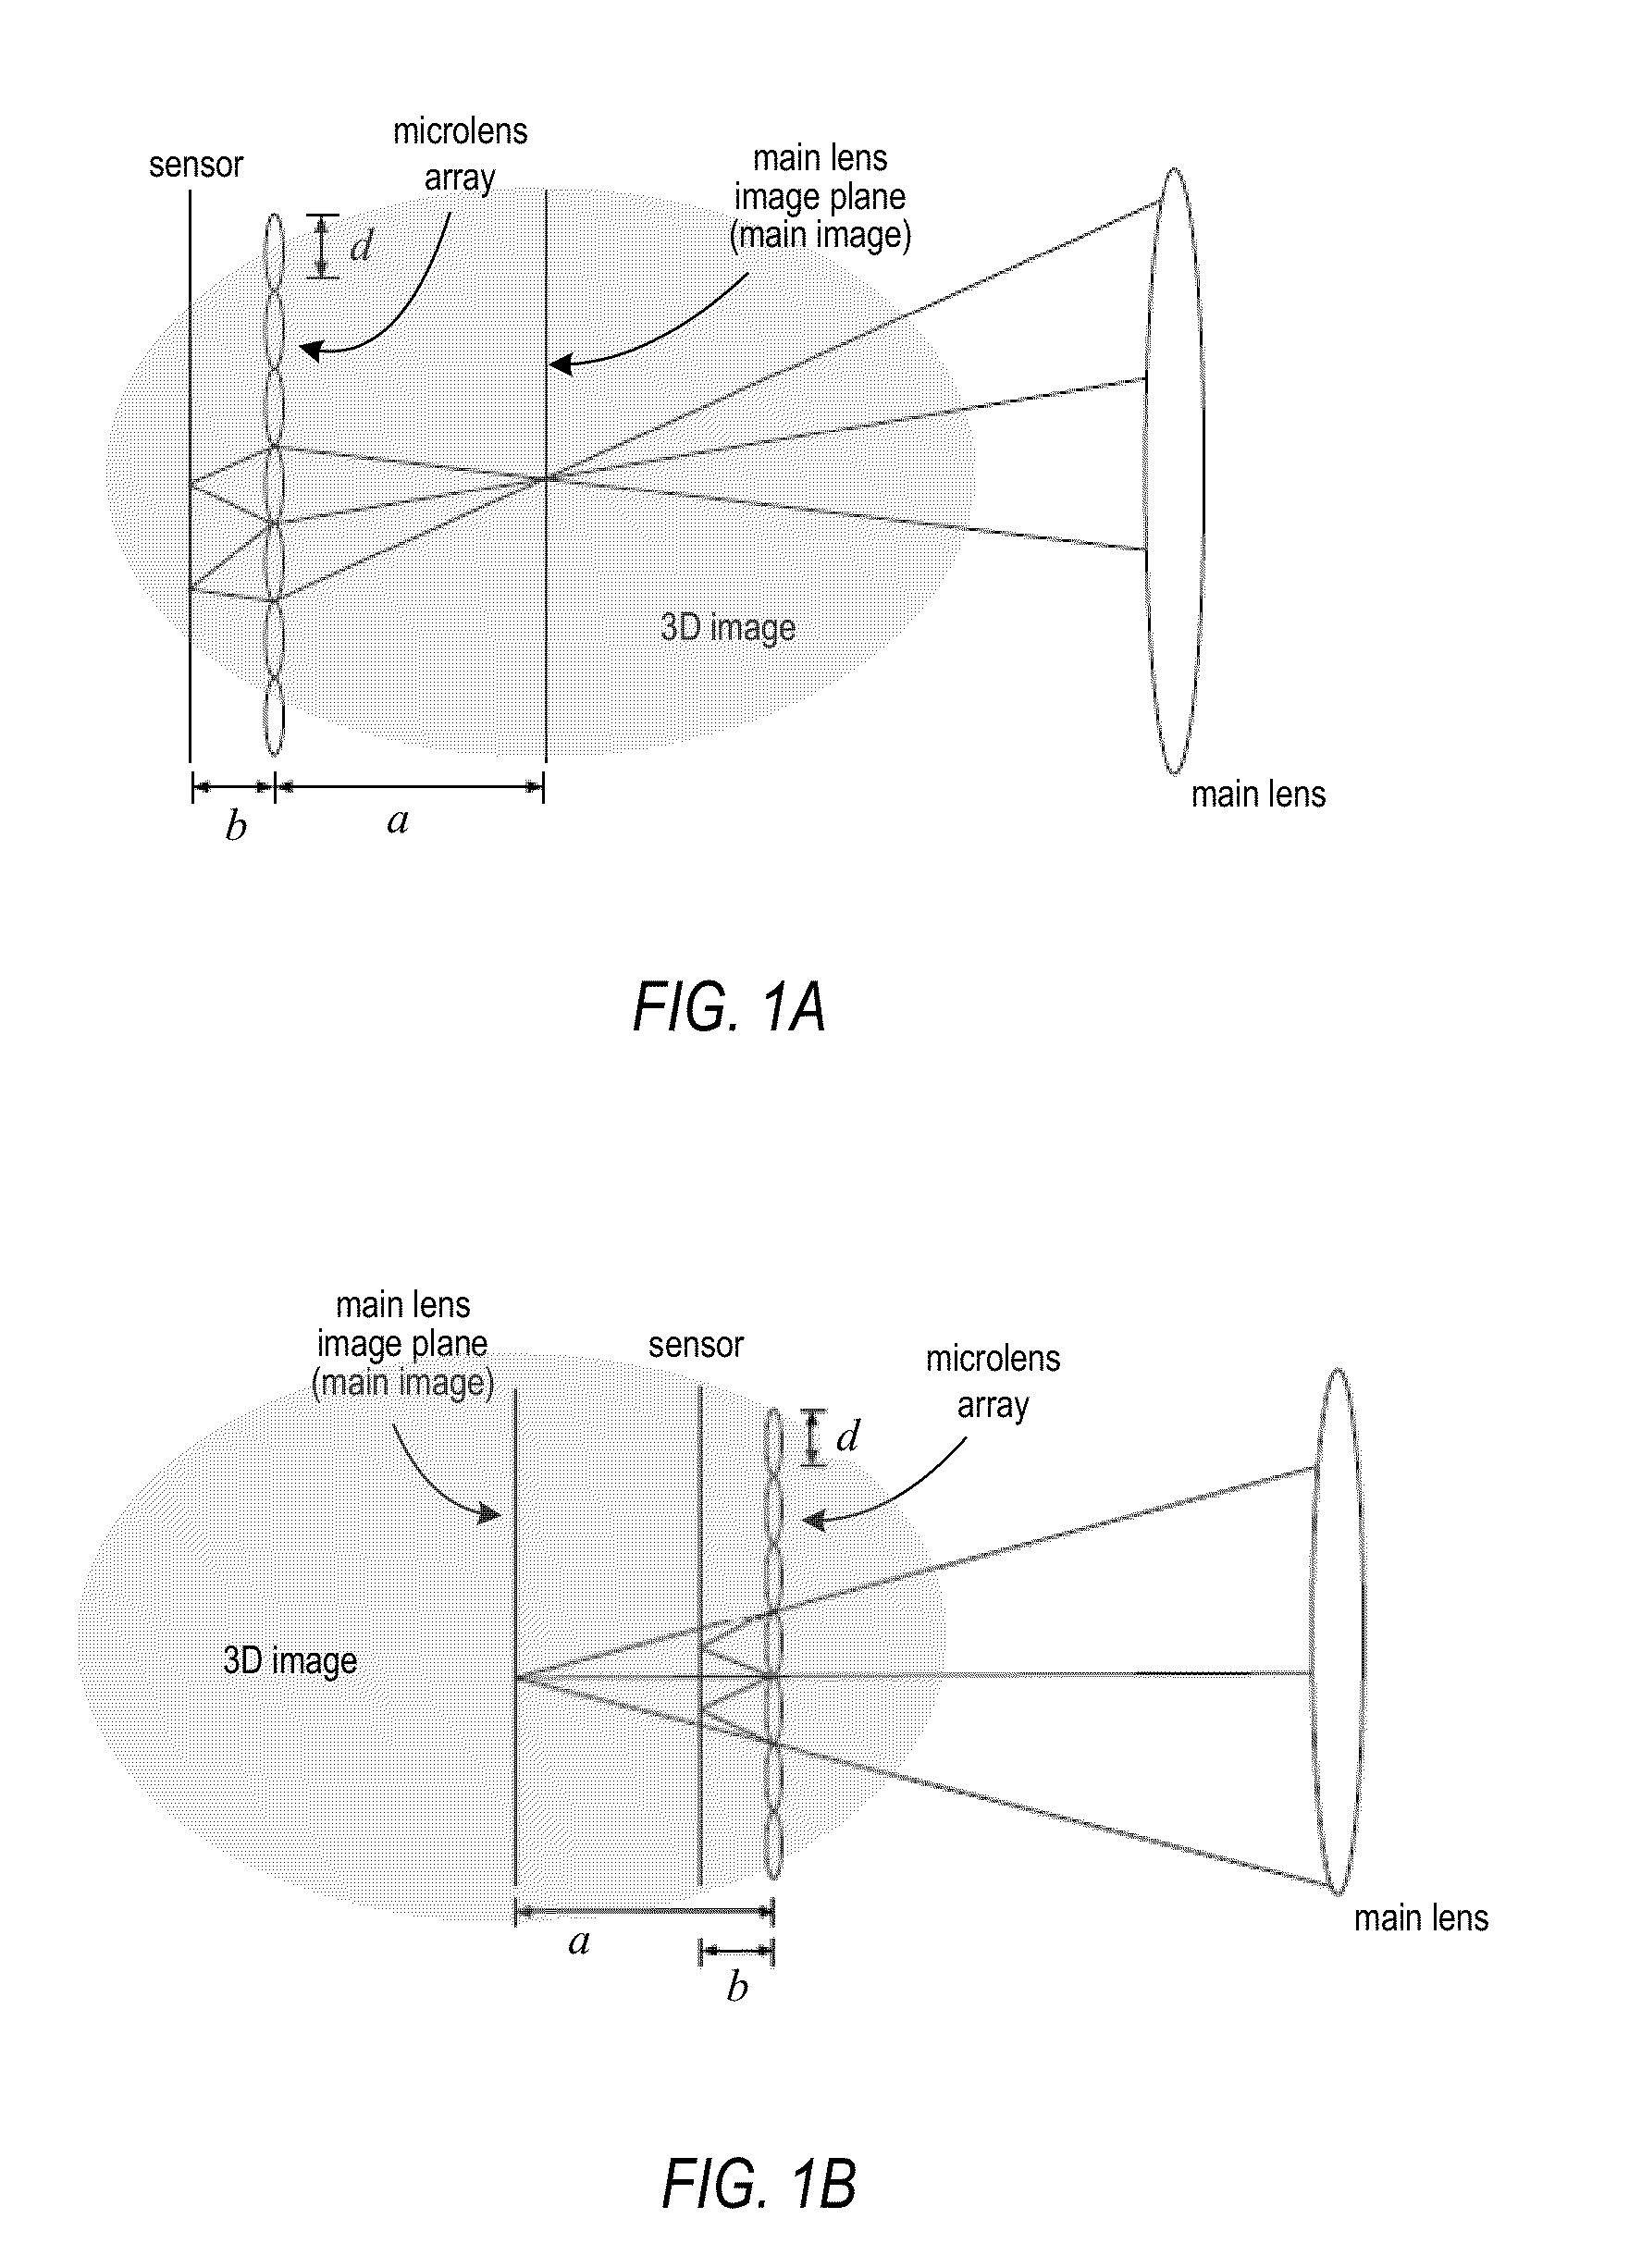 Methods and Apparatus for Rendering Output Images with Simulated Artistic Effects from Focused Plenoptic Camera Data